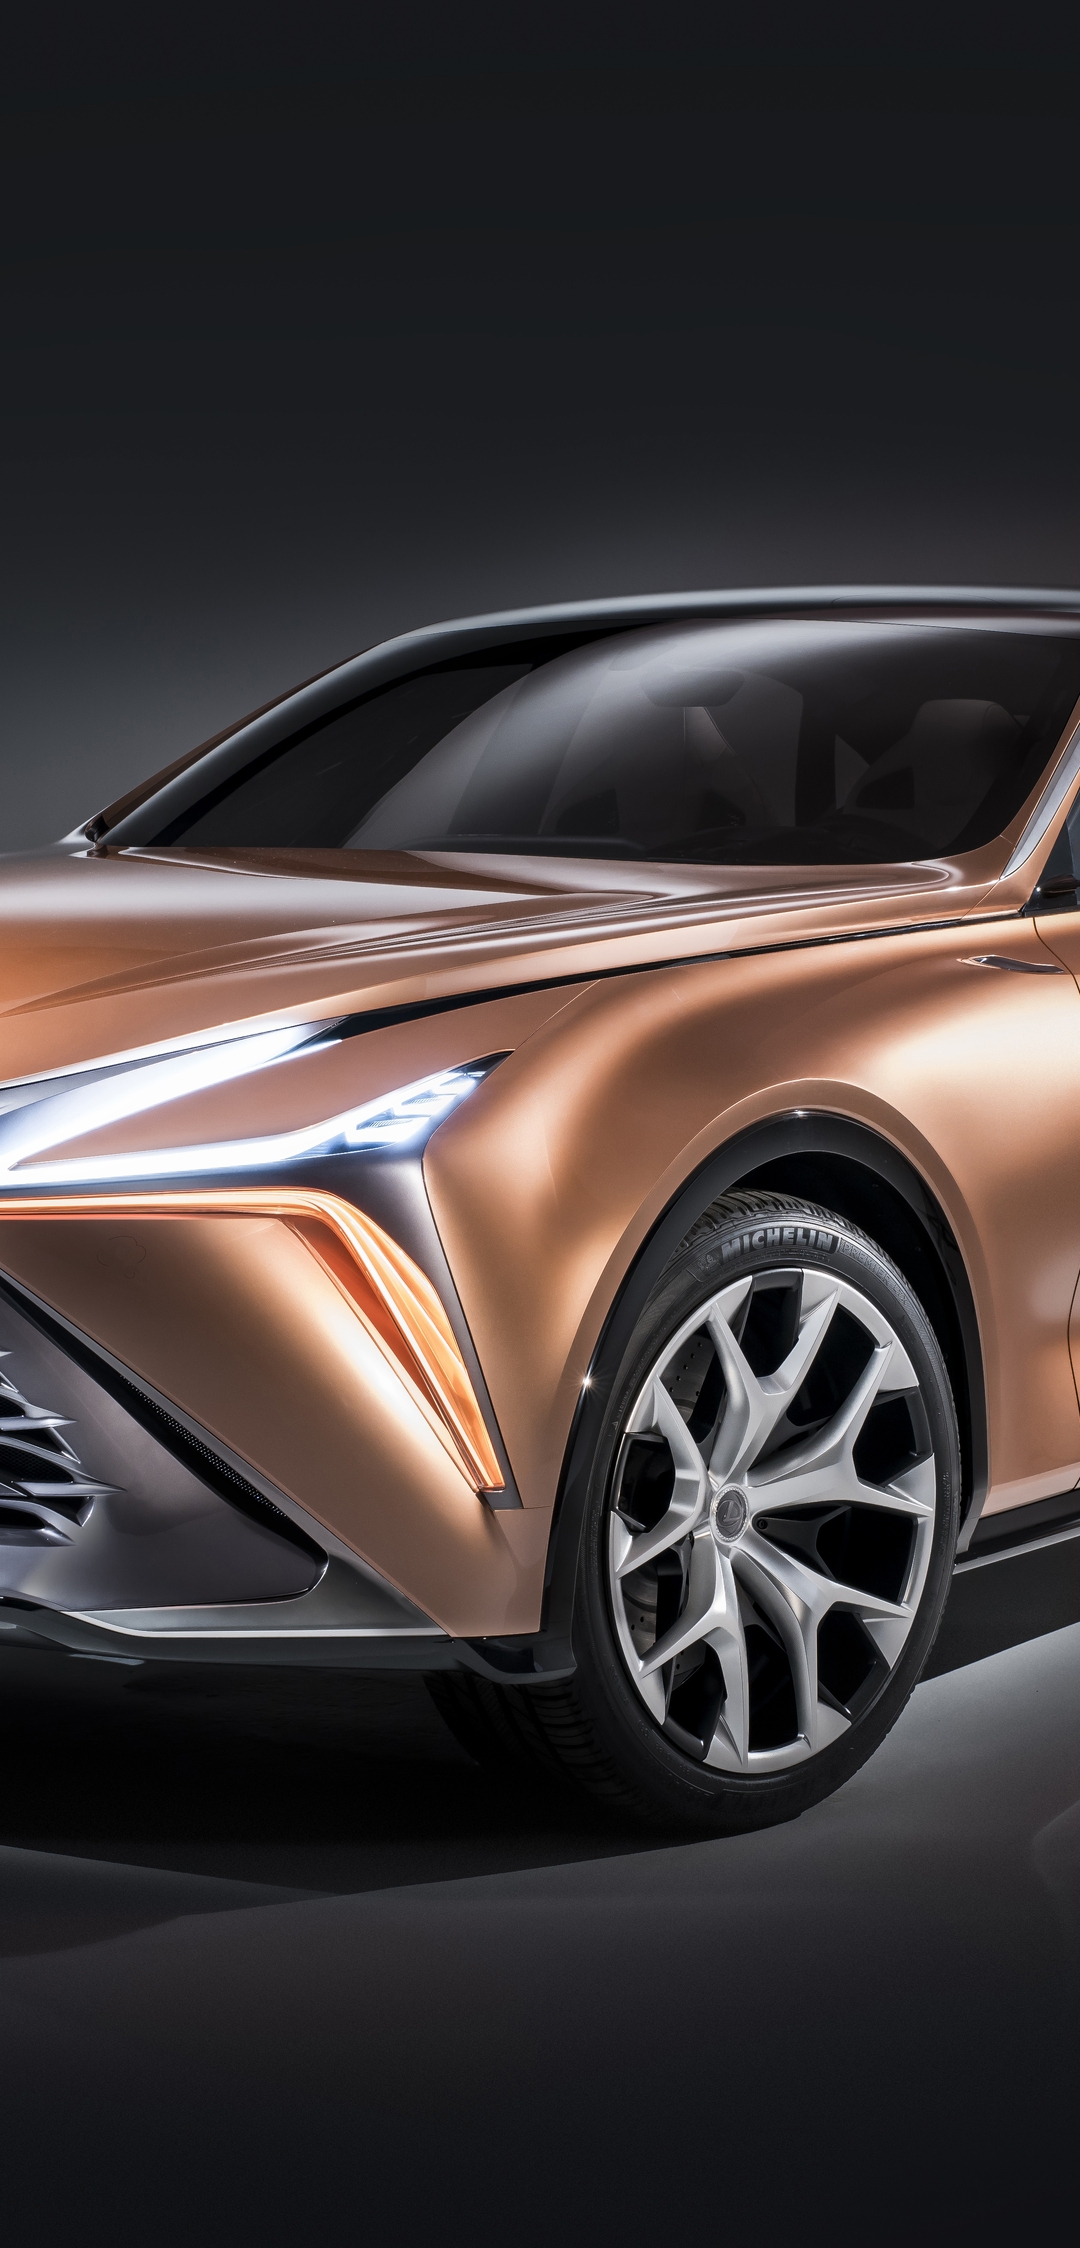 Image: Lexus, LF-1, Limitless, Concept, Crossover